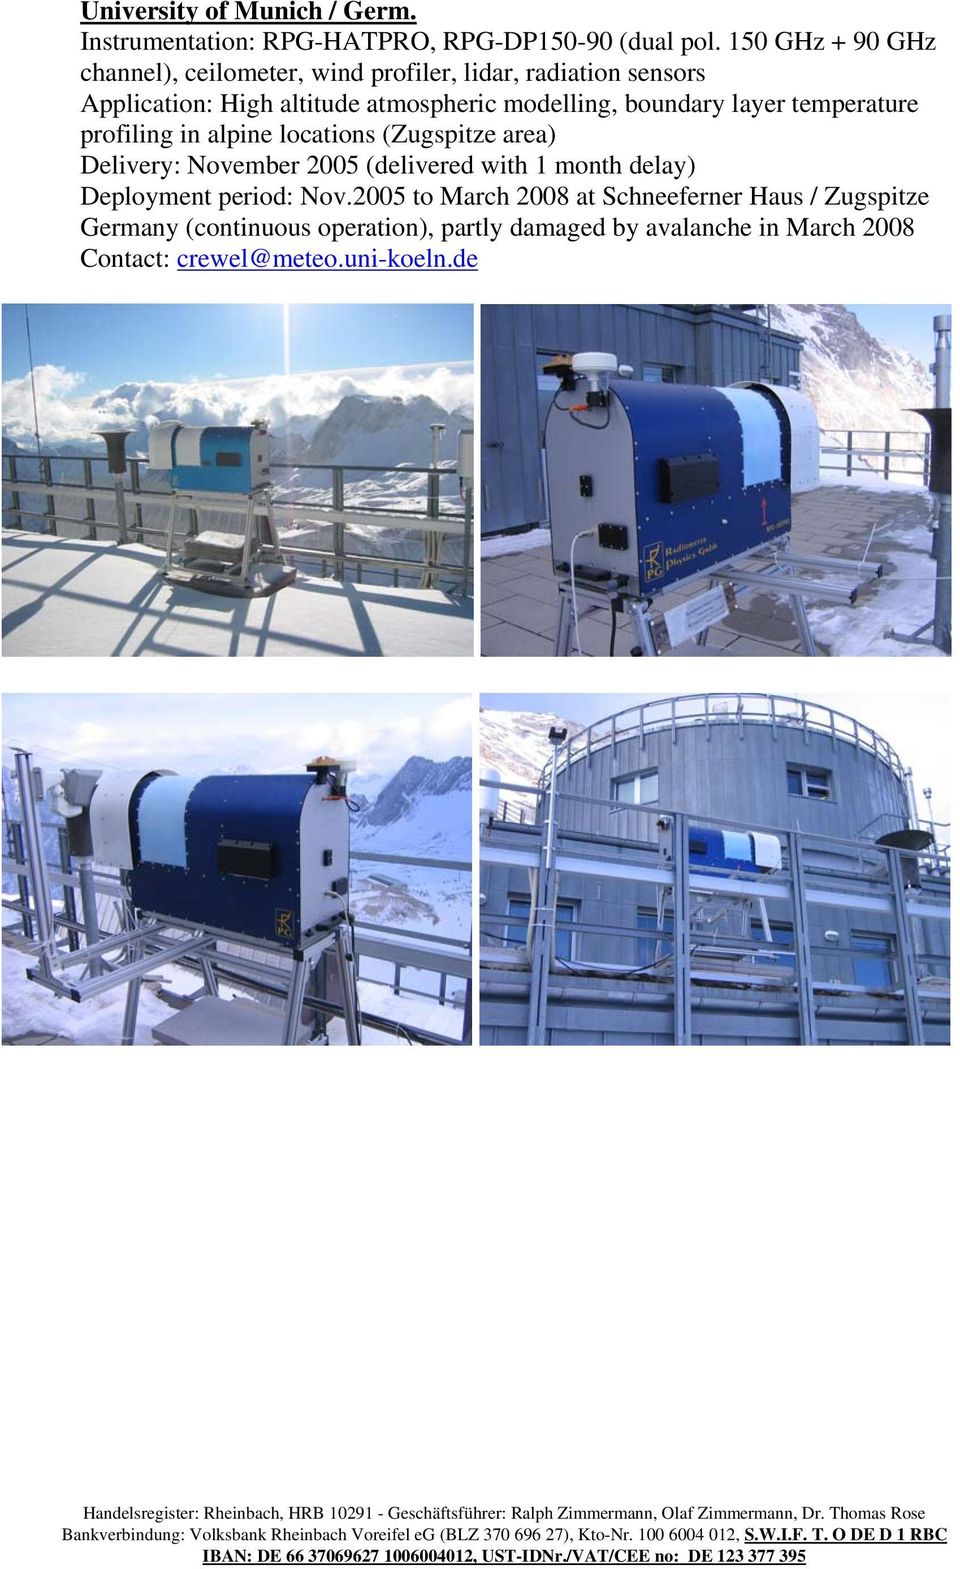 boundary layer temperature profiling in alpine locations (Zugspitze area) Delivery: November 2005 (delivered with 1 month delay)